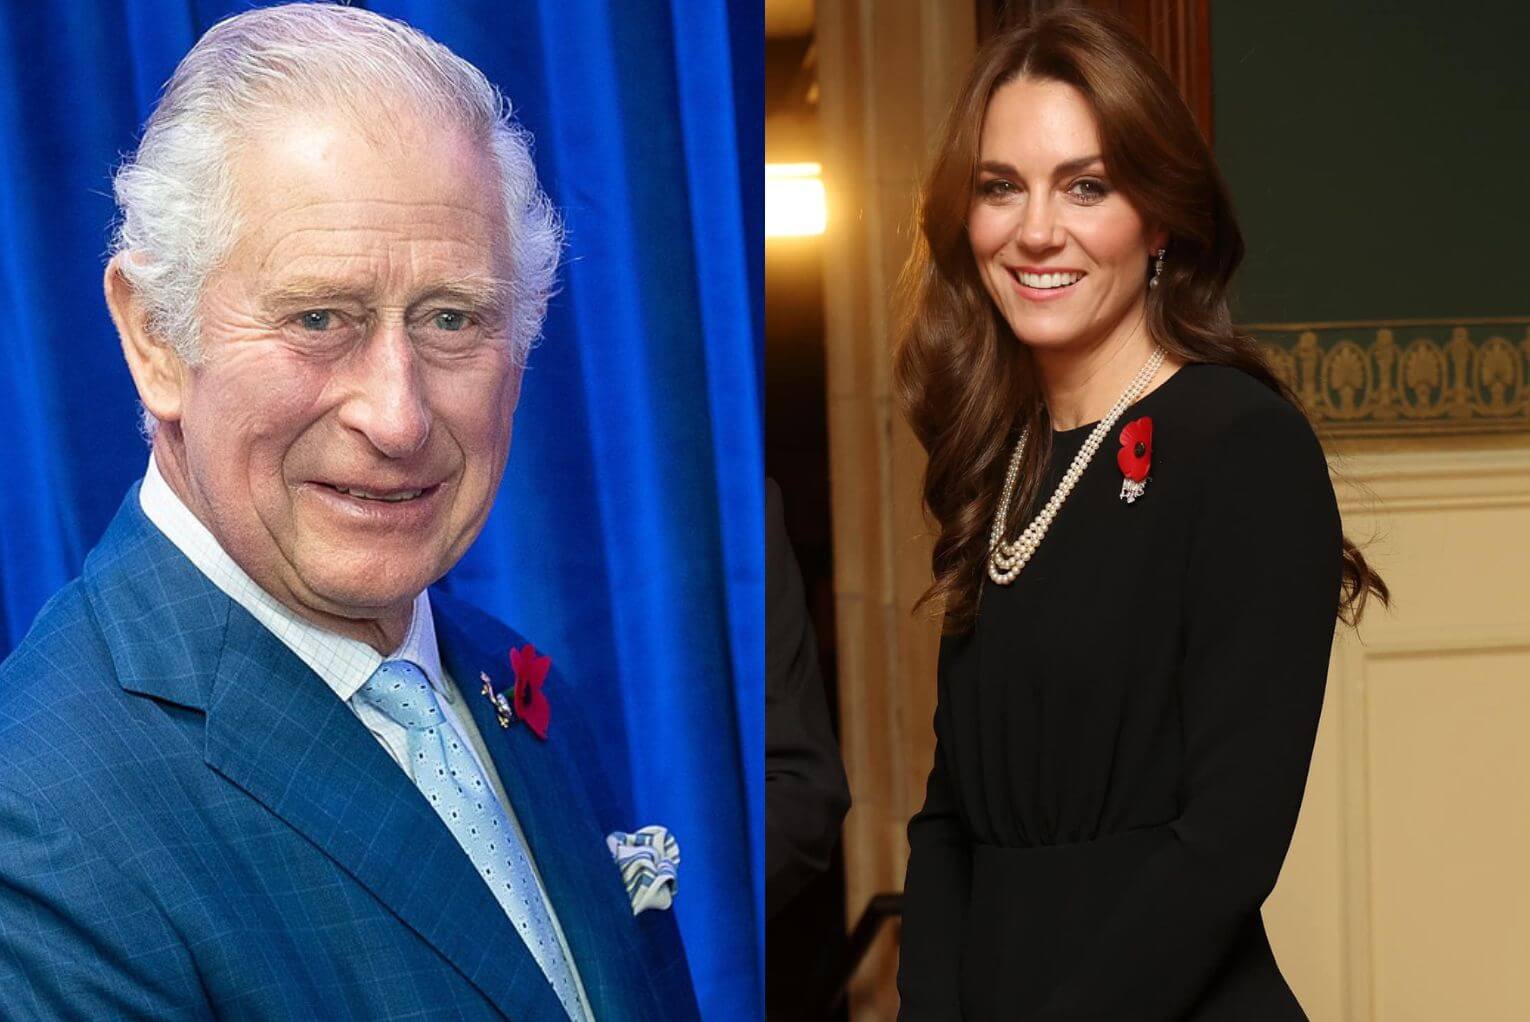 Double Blow: Charles’ and Kate’s Cancer Revelations Shock the World